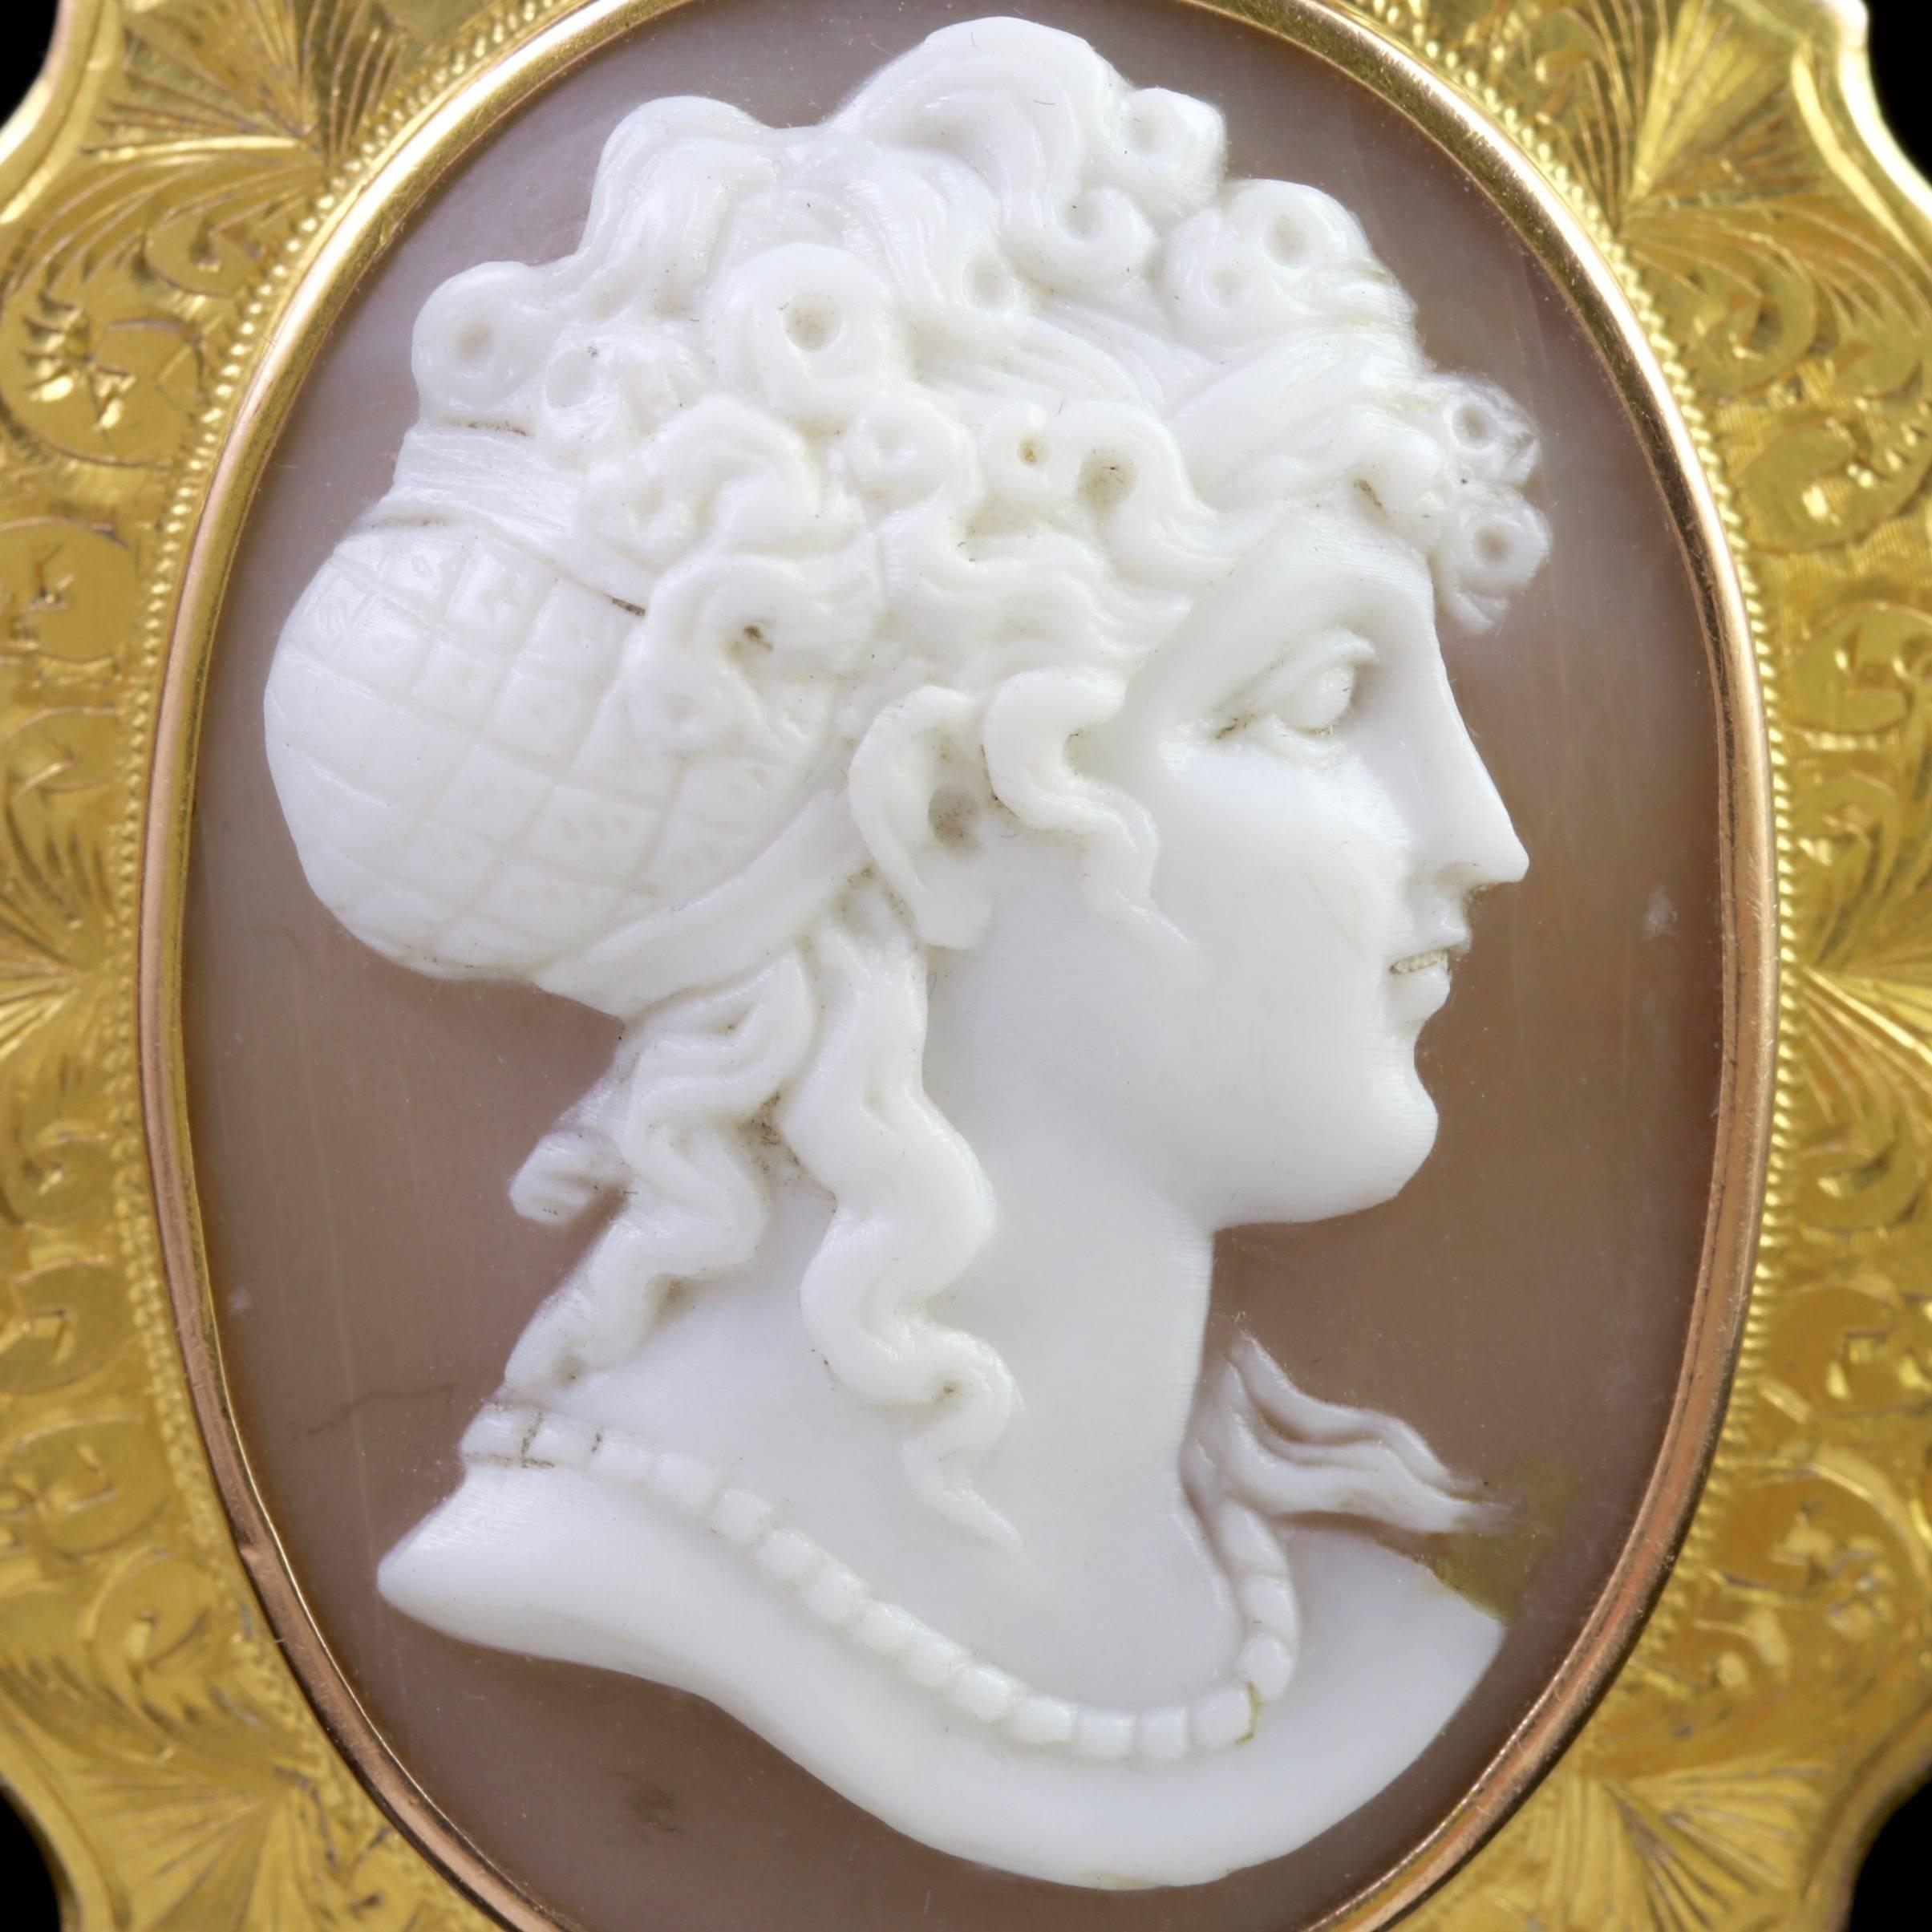 To read more please click continue reading below-

This beautiful antique 15ct Yellow Gold Cameo brooch is genuine Victorian Circa 1880. 

The central Cameo is expertly carved from a Bullmouth Shell depicting a lovely portrait of an elegant lady